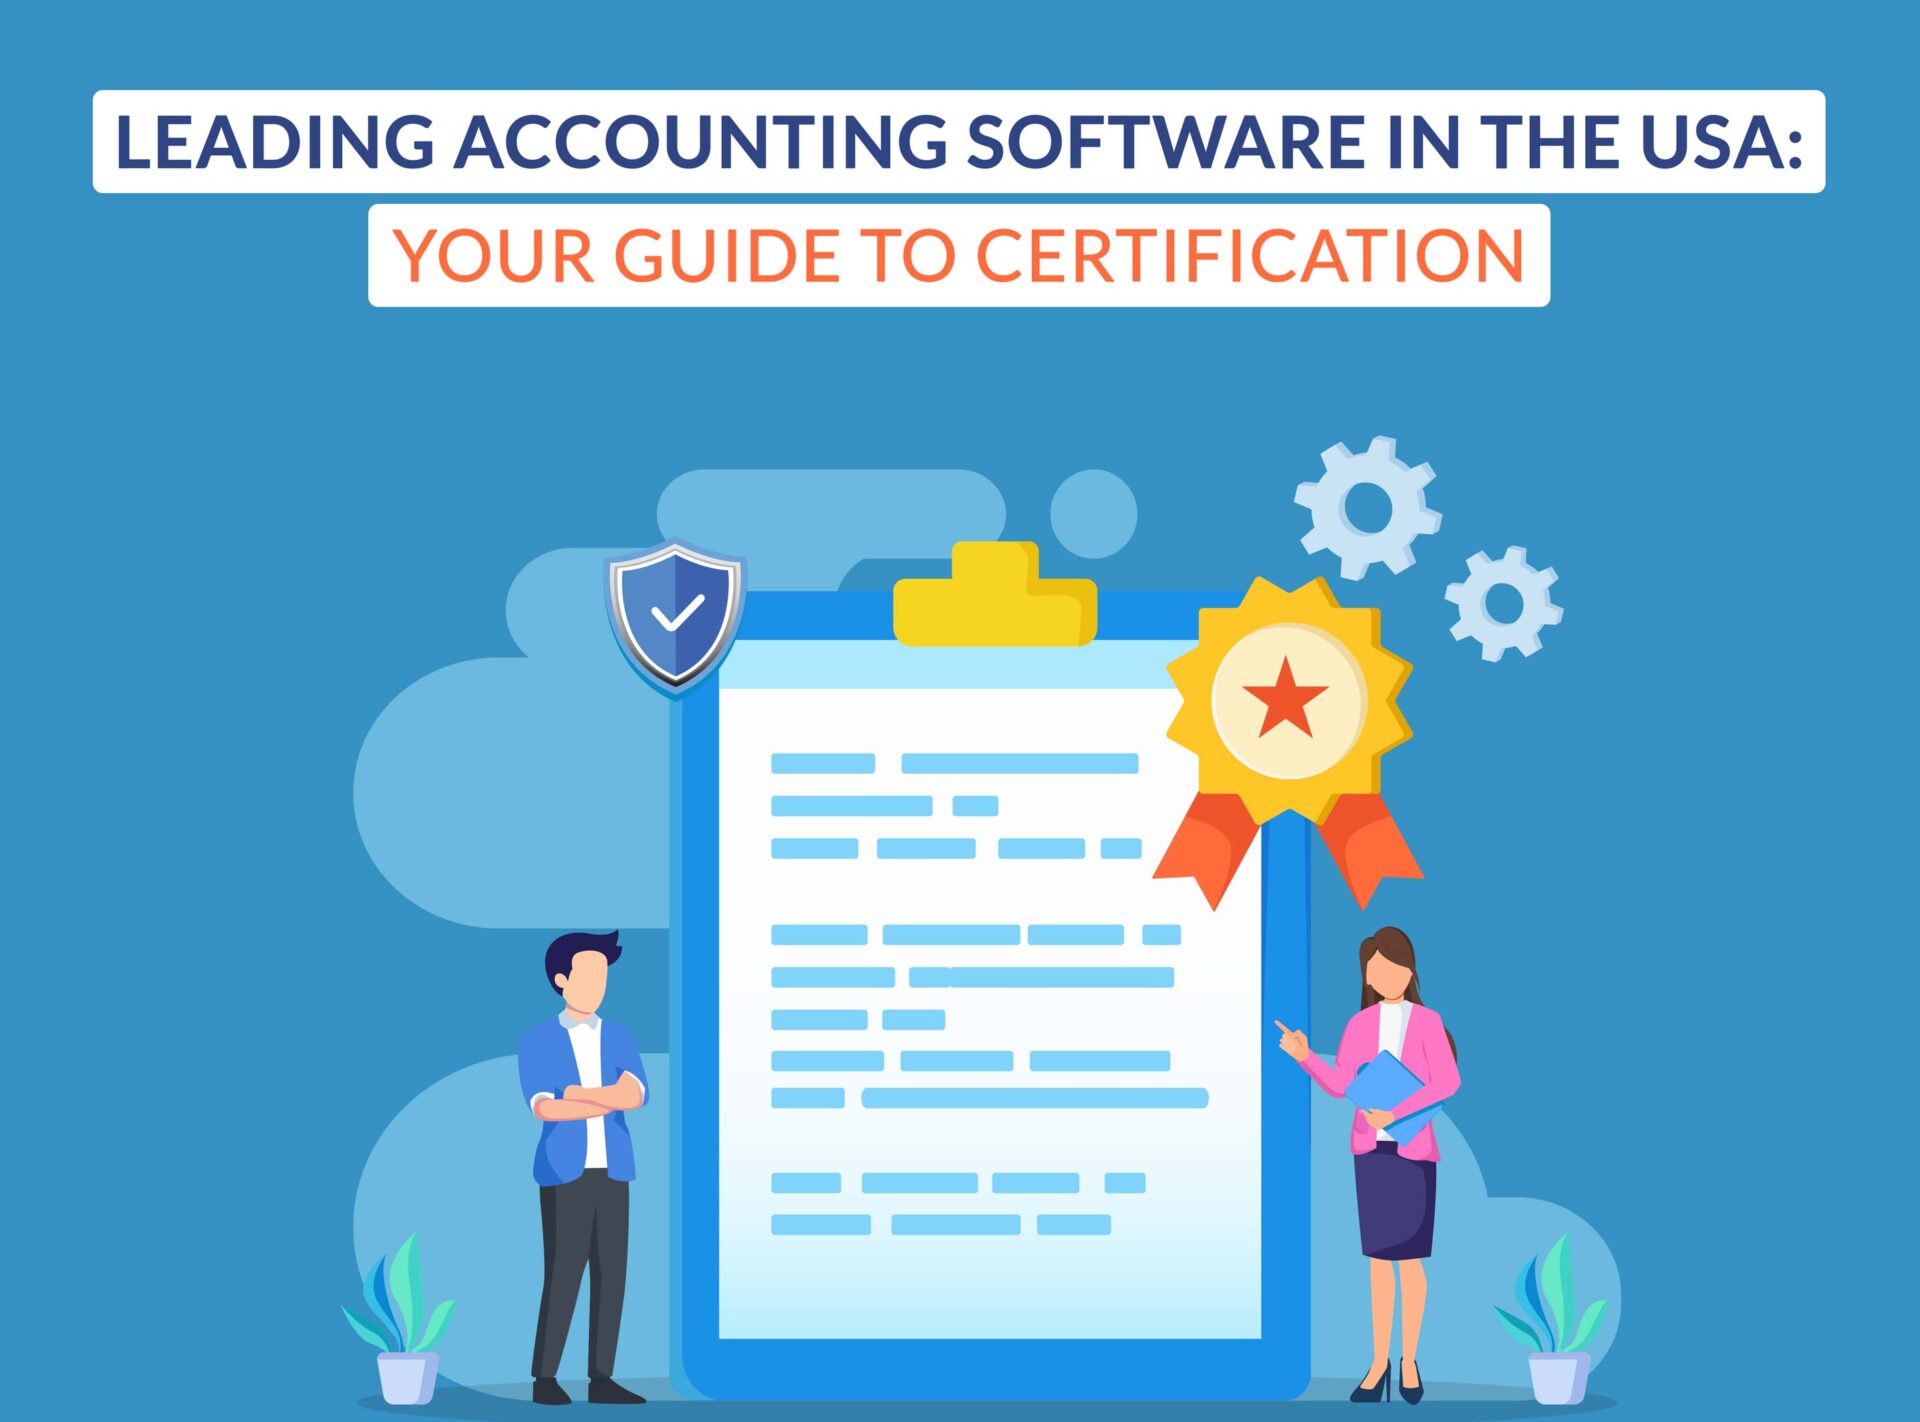 10 Leading Accounting Software in the USA: Your Guide to Certification